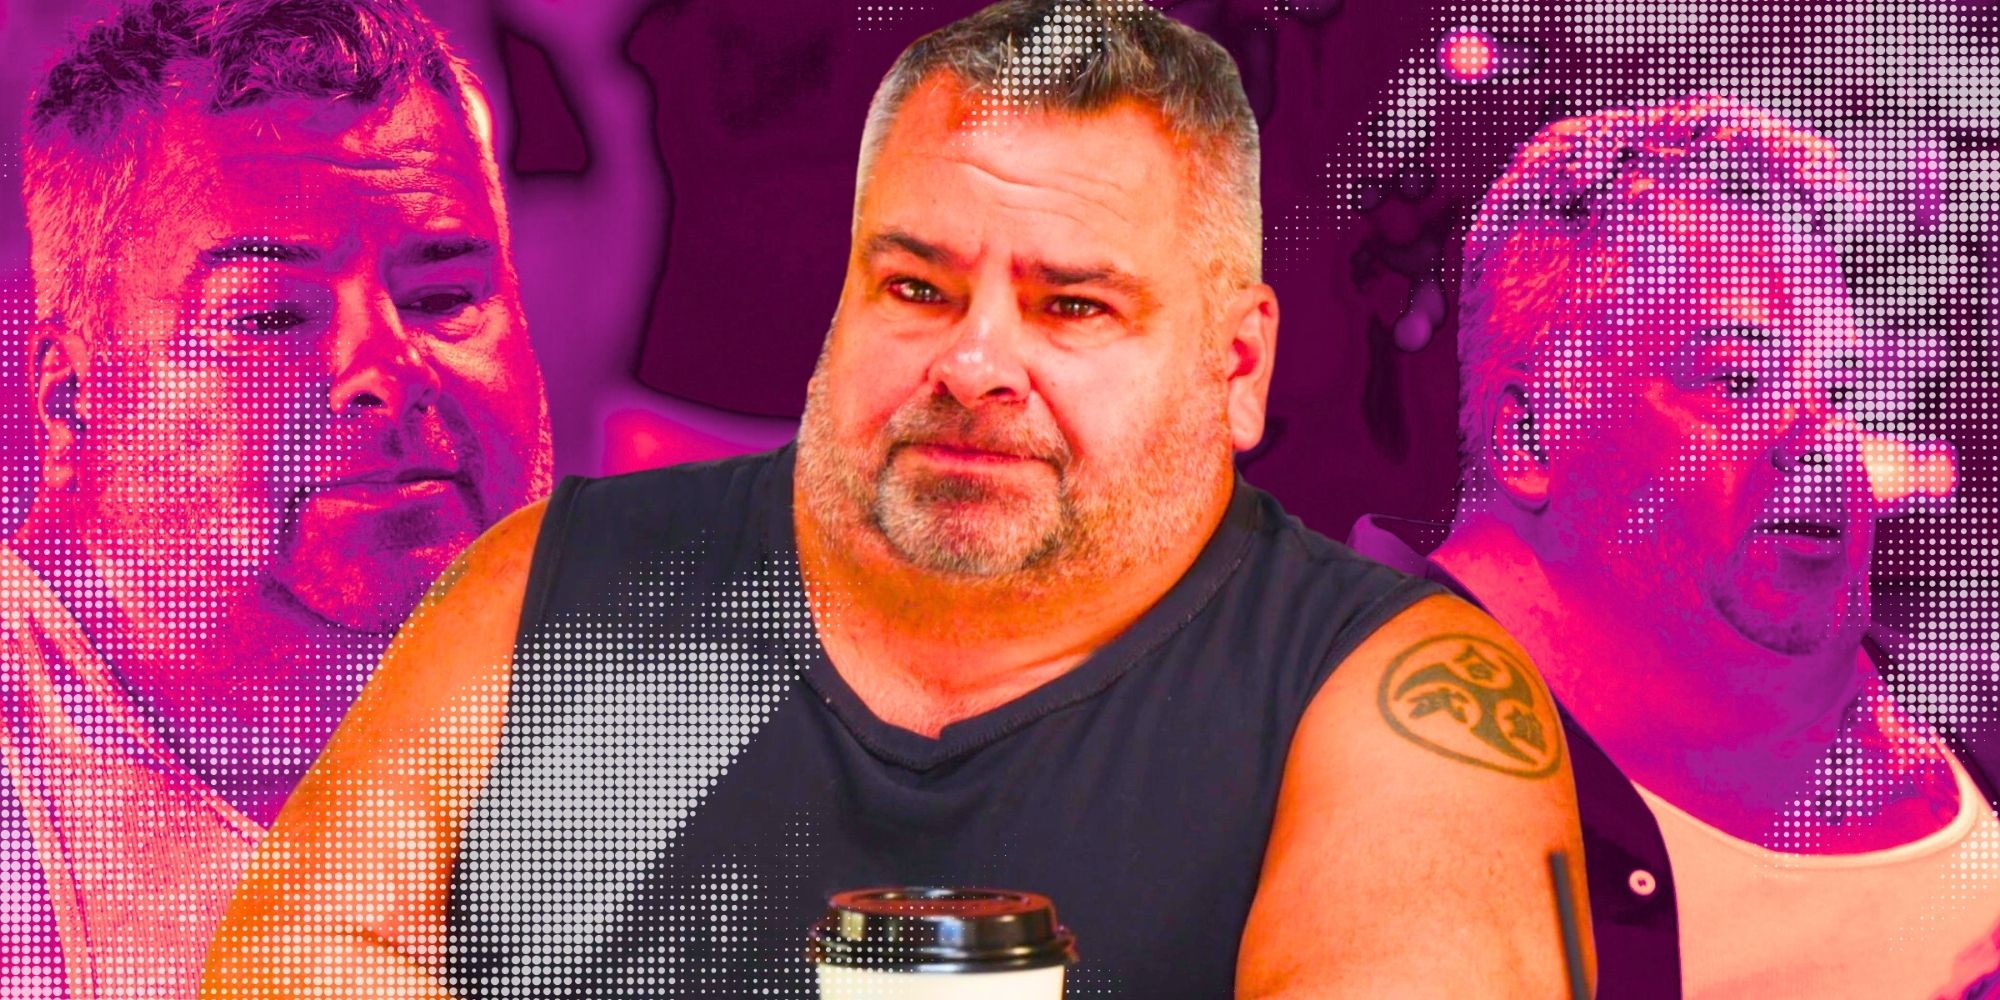 montage of Big Ed from 90 day fiance with orange and pink colors